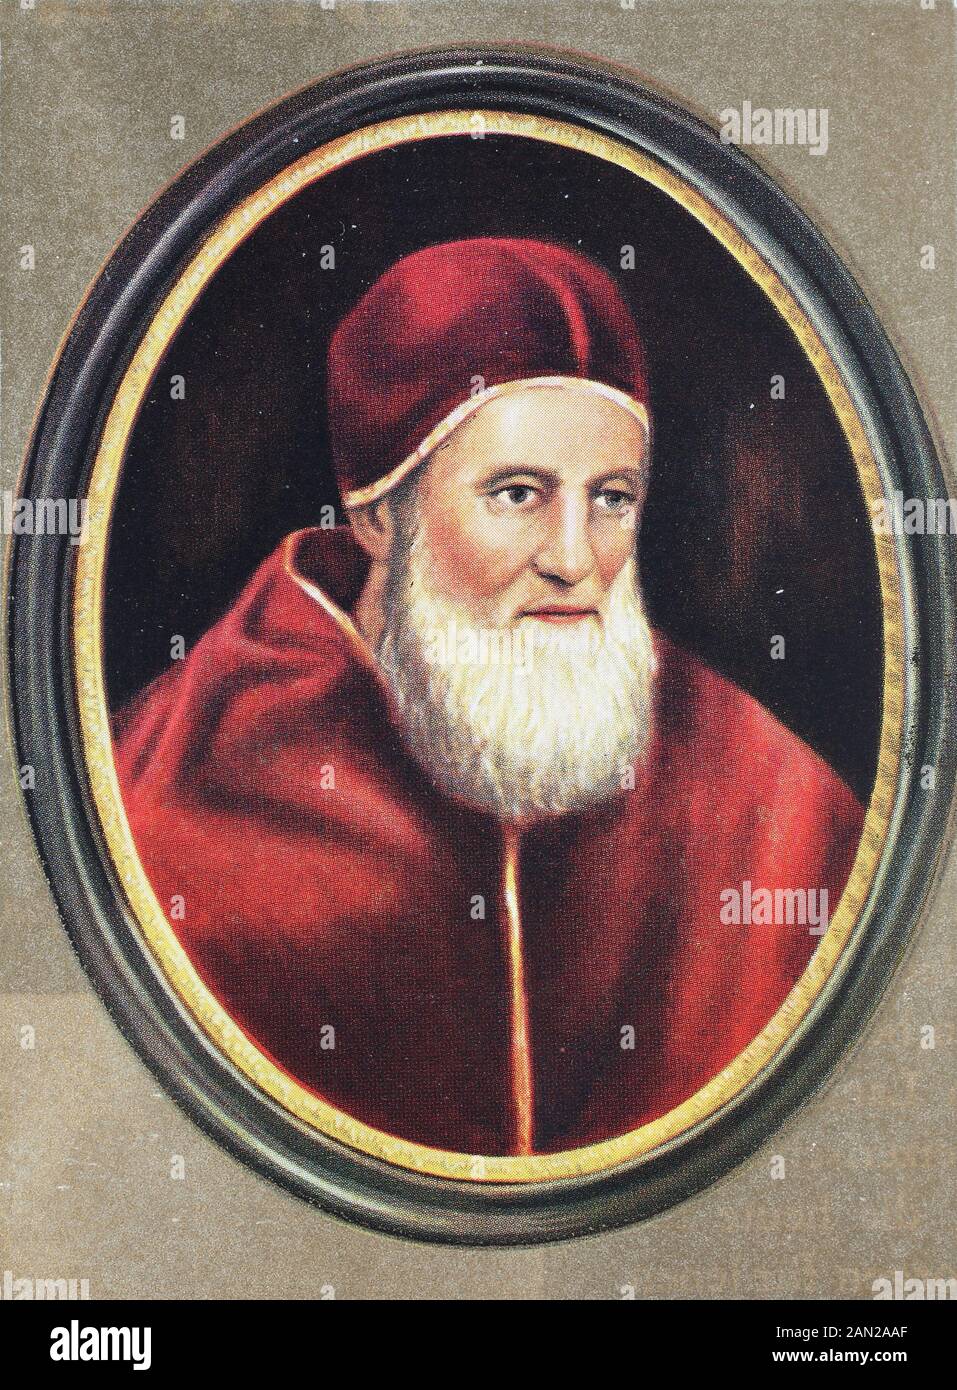 Pope Julius II,Papa Giulio II, 5 December 1443 – 21 February 1513, born Giuliano della Rovere, and nicknamed The Fearsome Pope and The Warrior Pope,   /  Papst Julius II., Papa Giulio II., 5. Dezember 1443 - 21. Februar 1513, geboren Giuliano della Rovere, und Spitzname The Fearsome Papst und The Warrior Papst, Historisch, digital improved reproduction of an original from the 19th century / digitale Reproduktion einer Originalvorlage aus dem 19. Jahrhundert Stock Photo